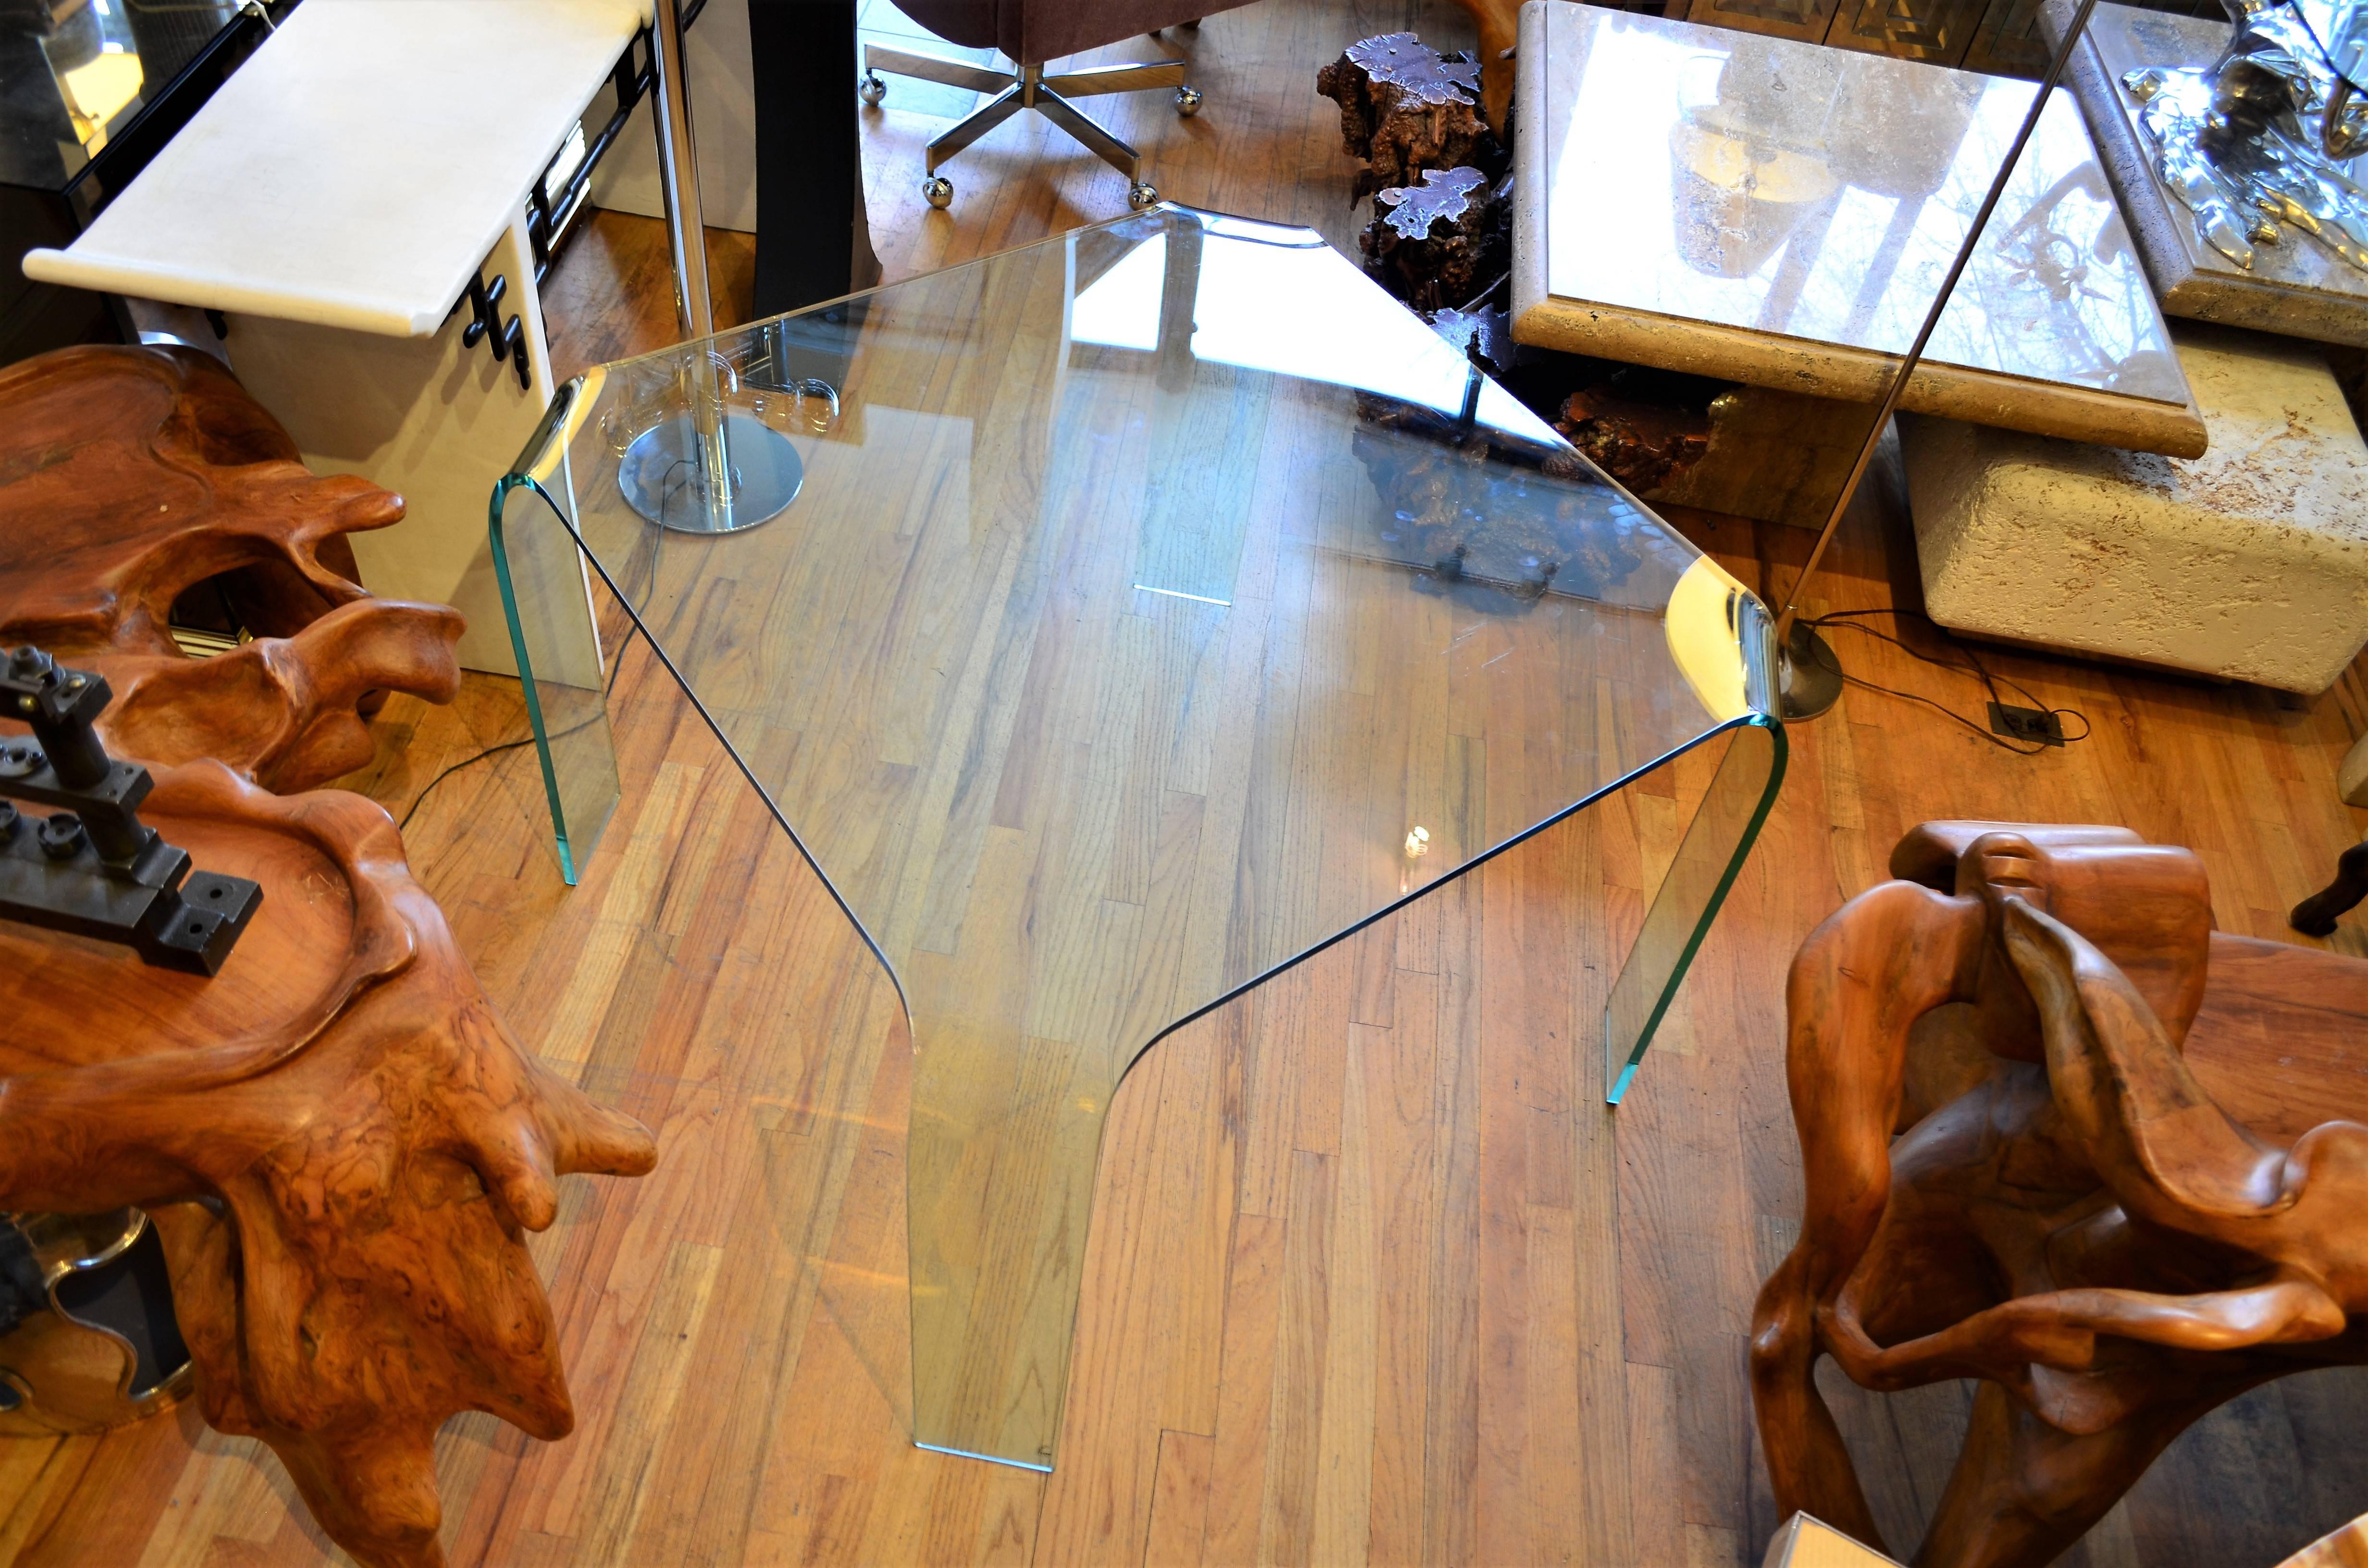 Italian square  glass ghost table by Italian designer Angelo Coertesi.
Fiam Italia was founded by Vittorio Livi in 1973 to produce glass furniture.
Fiam 's furniture was distributed by Pace in the US. Given its size it could also be a center table,